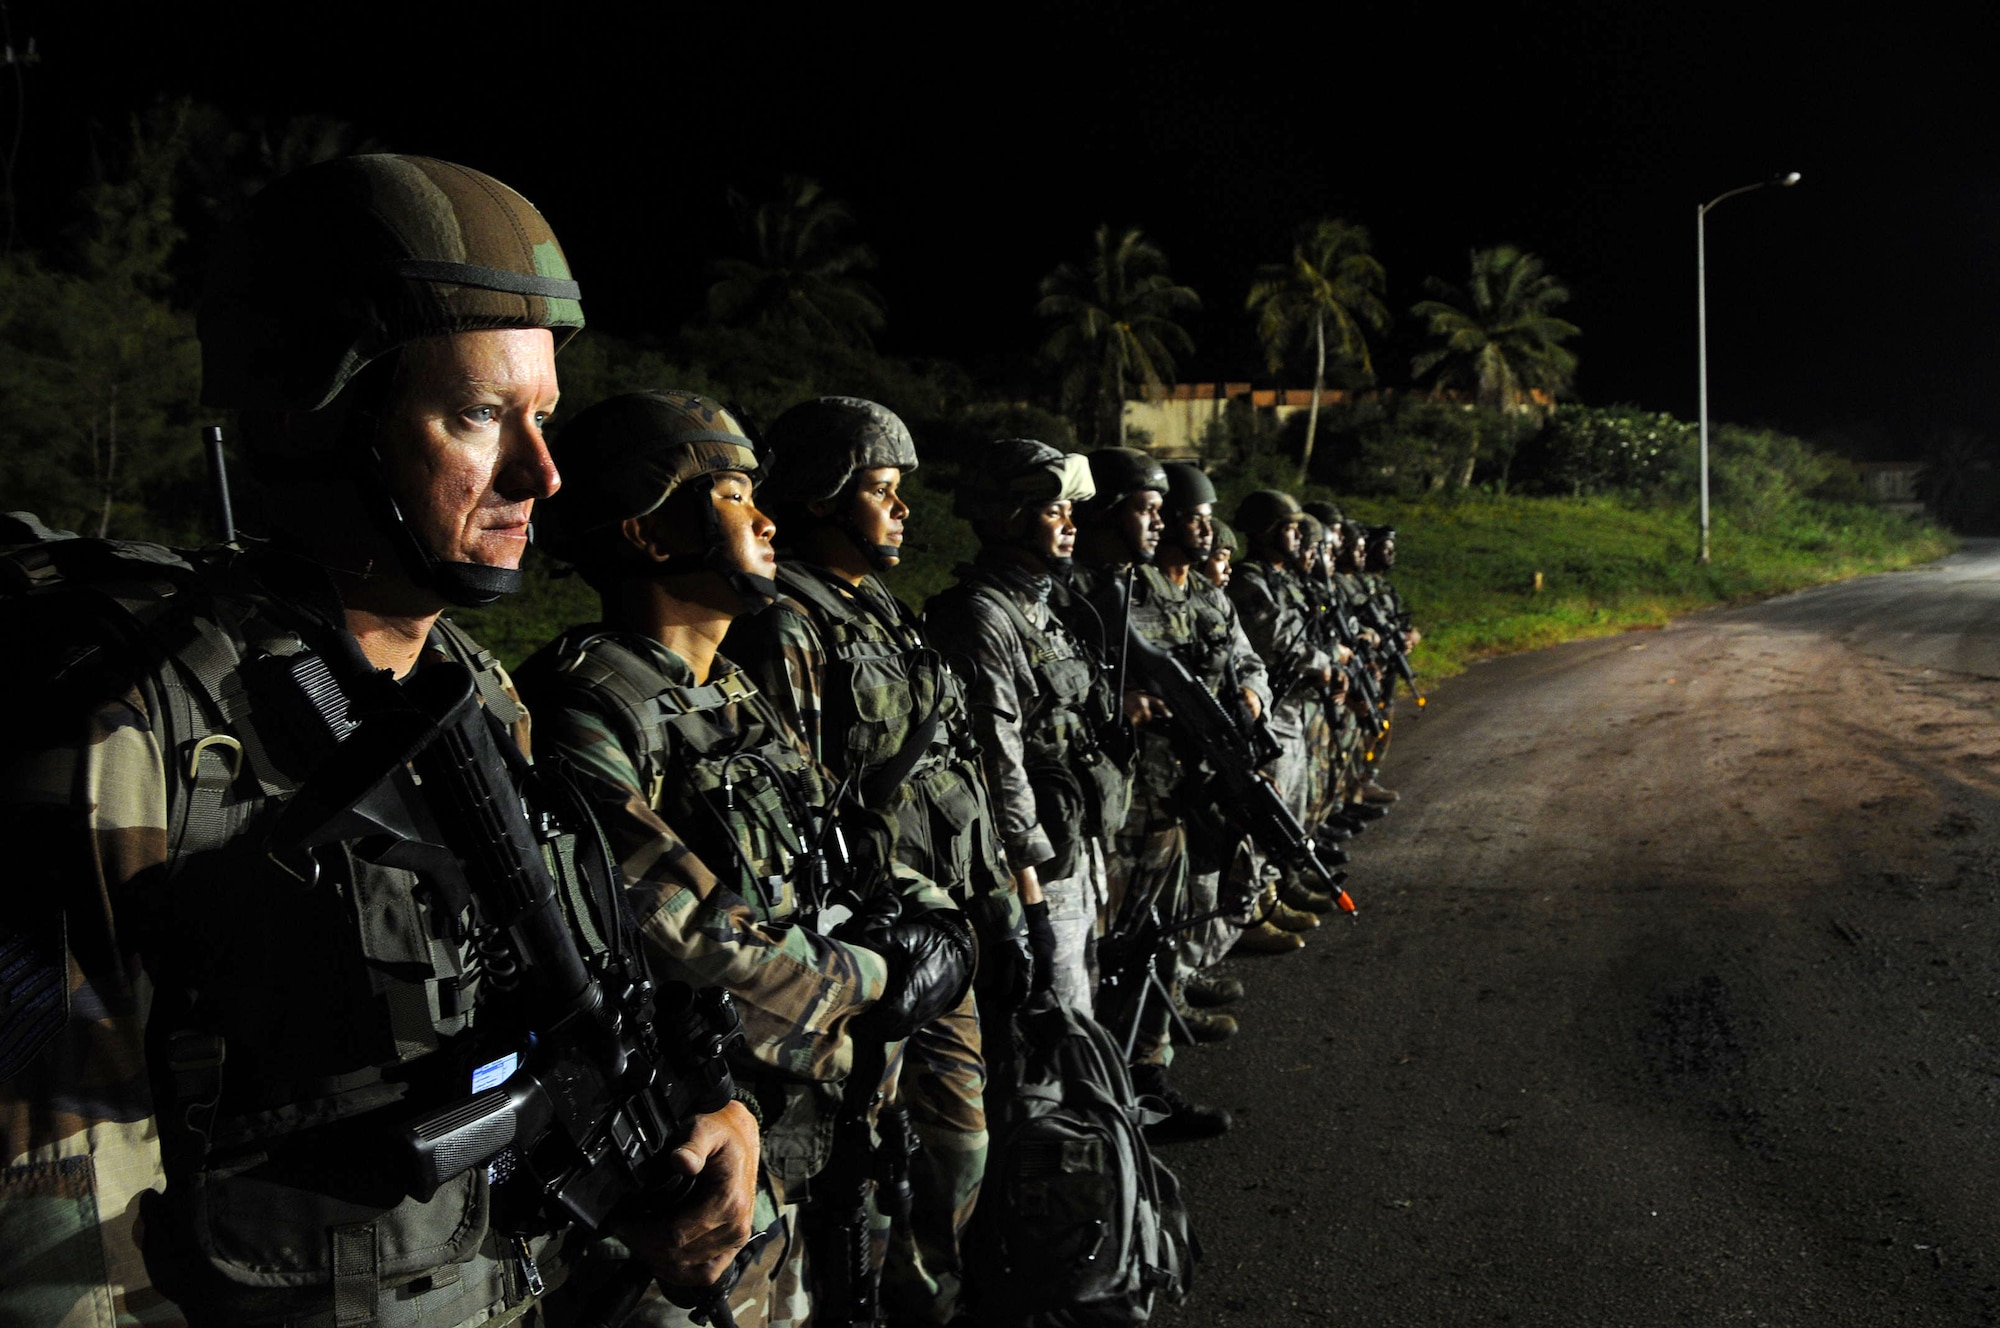 ANDERSEN AIR FORCE BASE, Guam - Members from the 154th Security Forces Squadron, Hawaii Air National Guard, stand ready for an upcoming scenario at Commando Warrior here Sept. 19. Approximately 1,500 students attend these courses annually to meet PACAF's training and deployment requirements. (U.S. Air Force photo by Airman 1st Class Courtney Witt)
